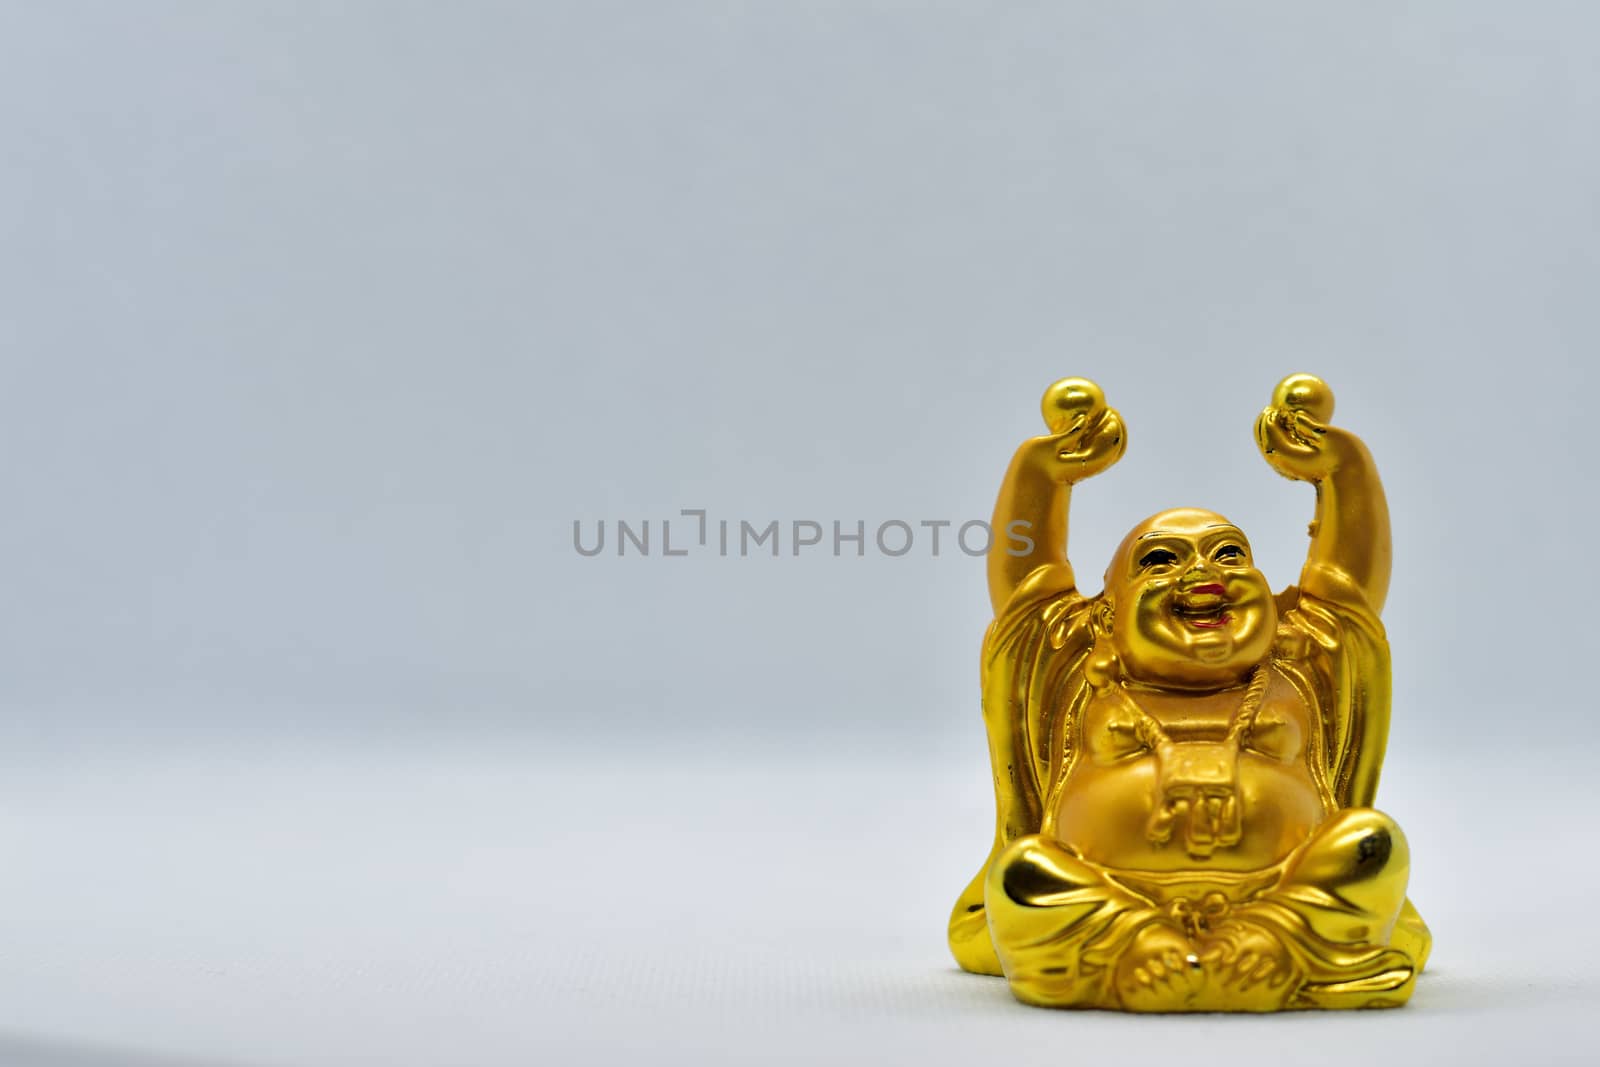 The Laughing Buddha is a symbol of happiness, contentment and prosperity. He is called ‘Budai’ in Chinese.